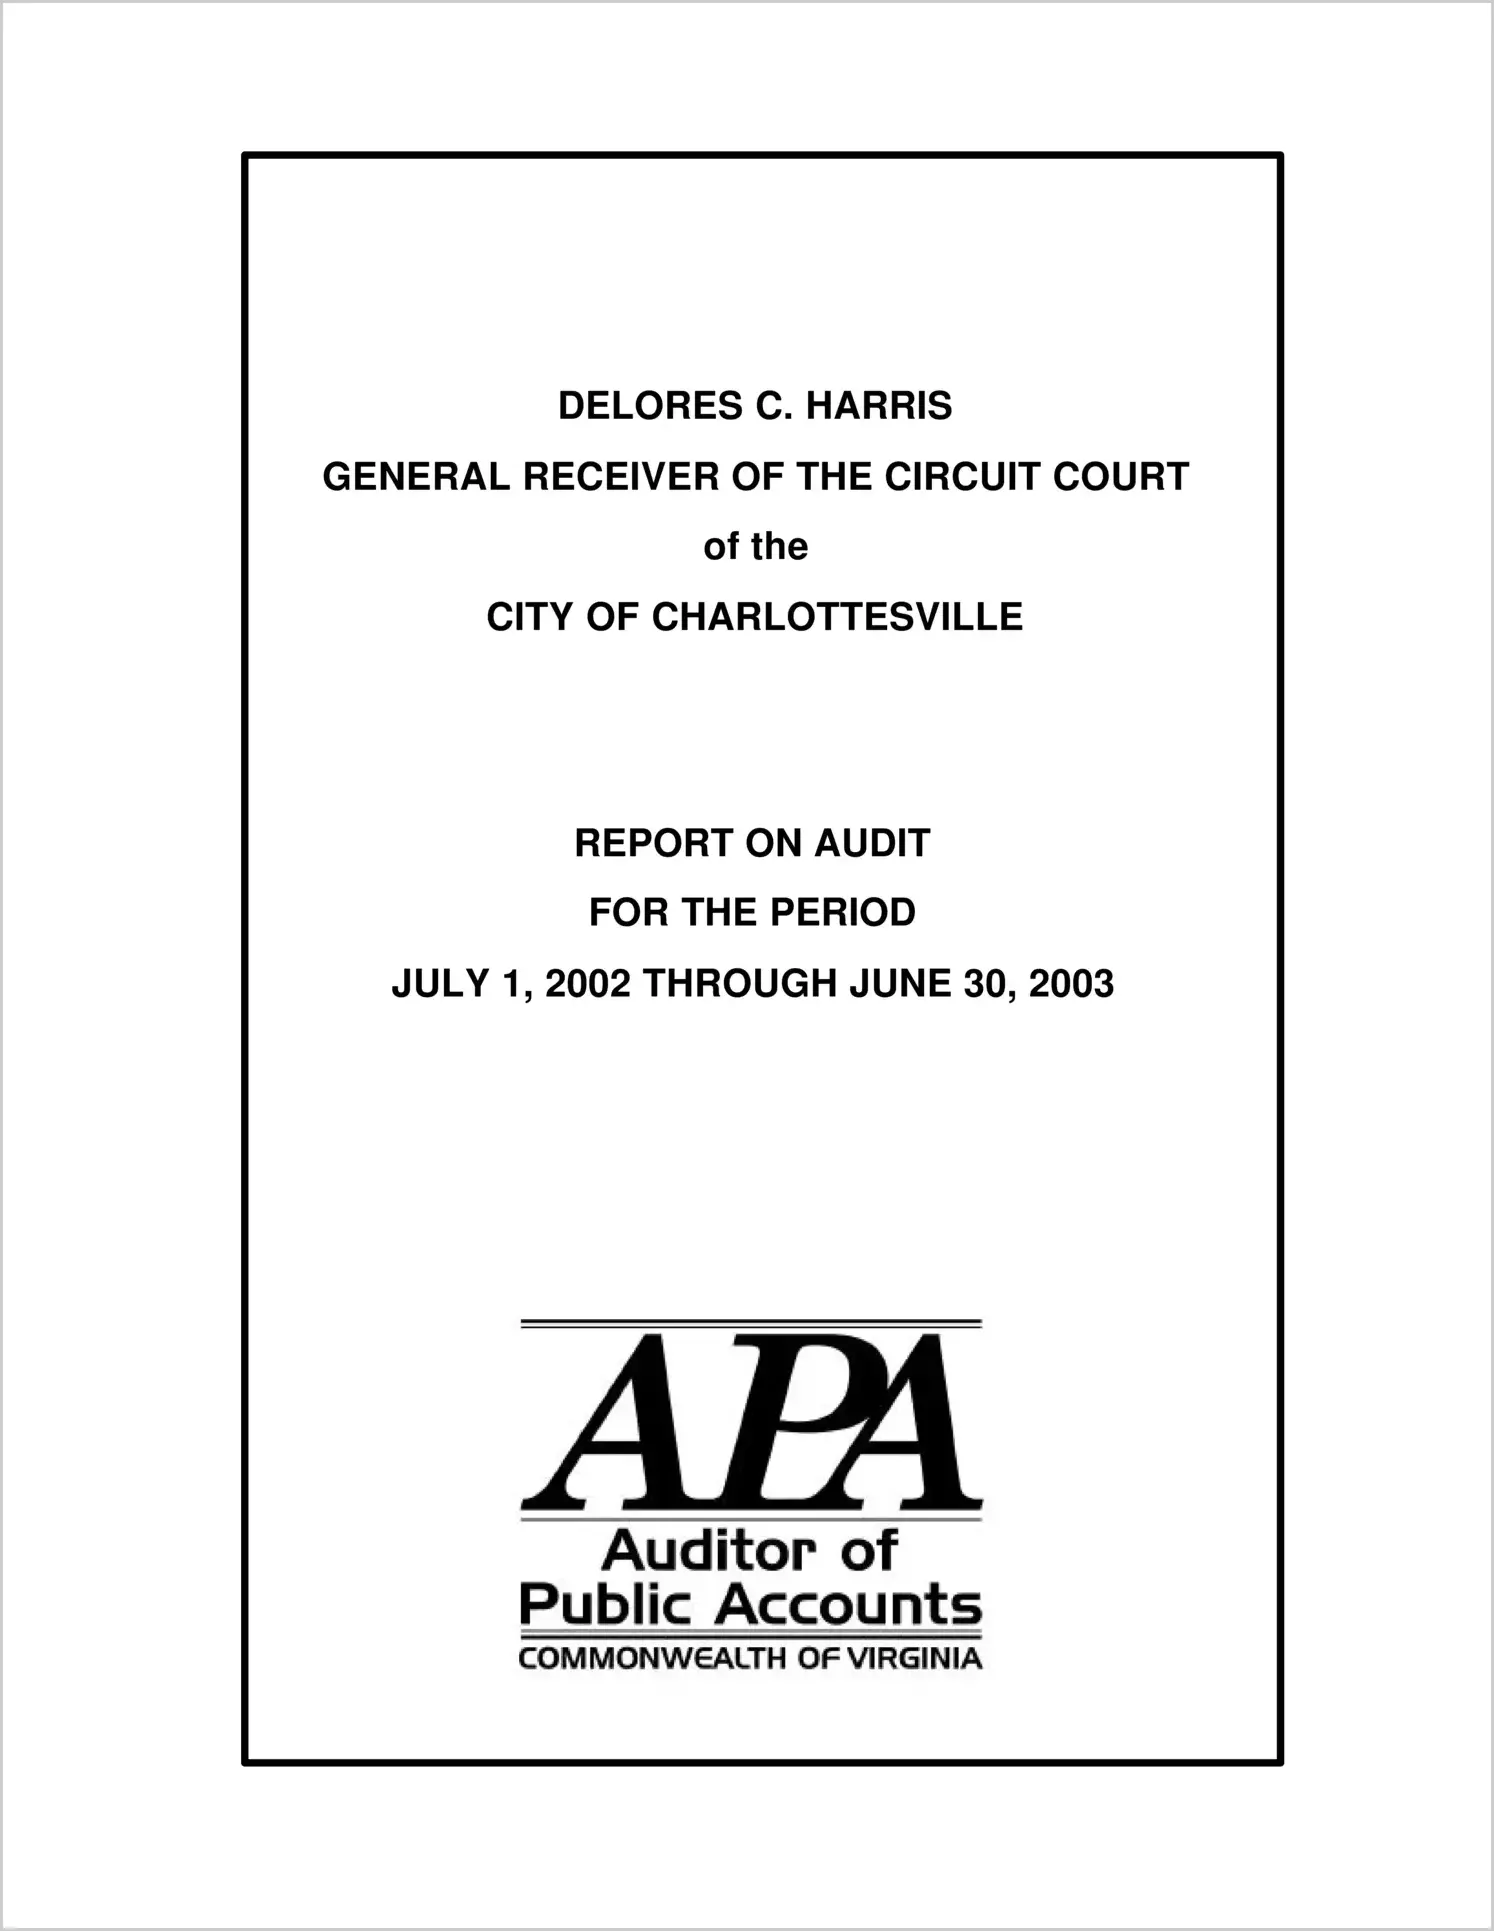 General Receiver of the Circuit Court for the period July 1, 2002 through June 30, 2003